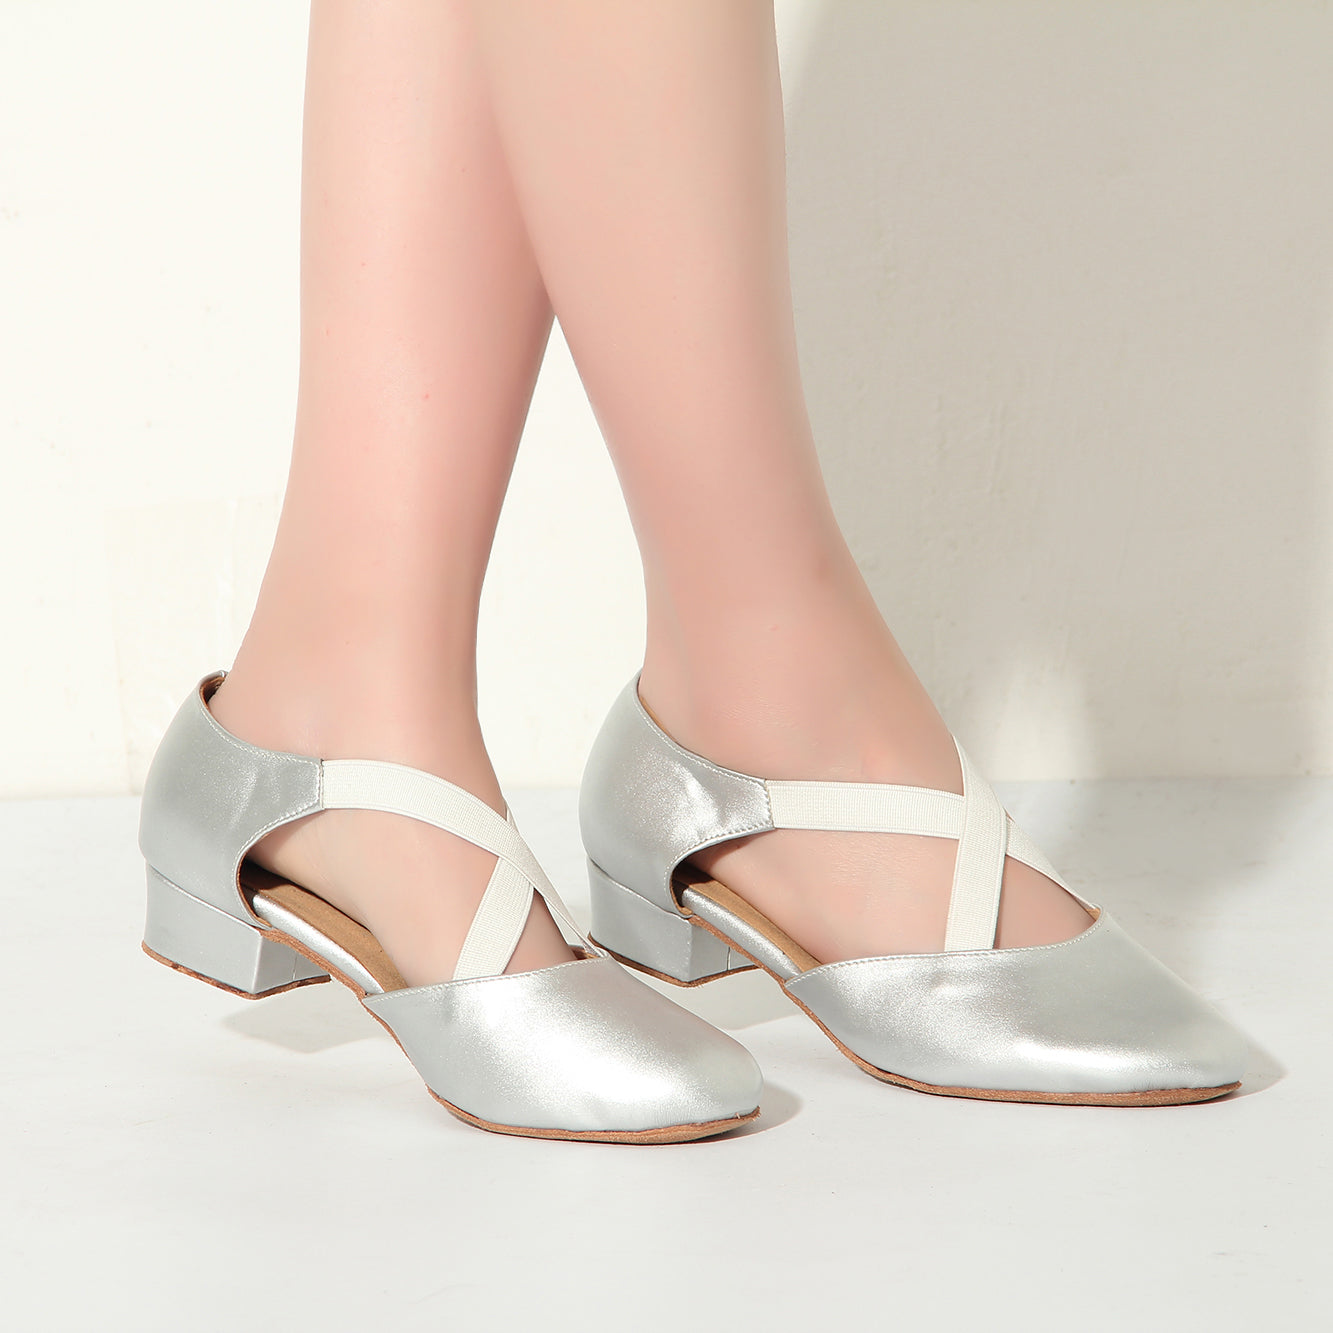 Women Ballroom Dancing Shoes with Suede Sole, Closed-toe Silver Tango Latin Practice Dance Shoe for Ladies (PD7307F)1